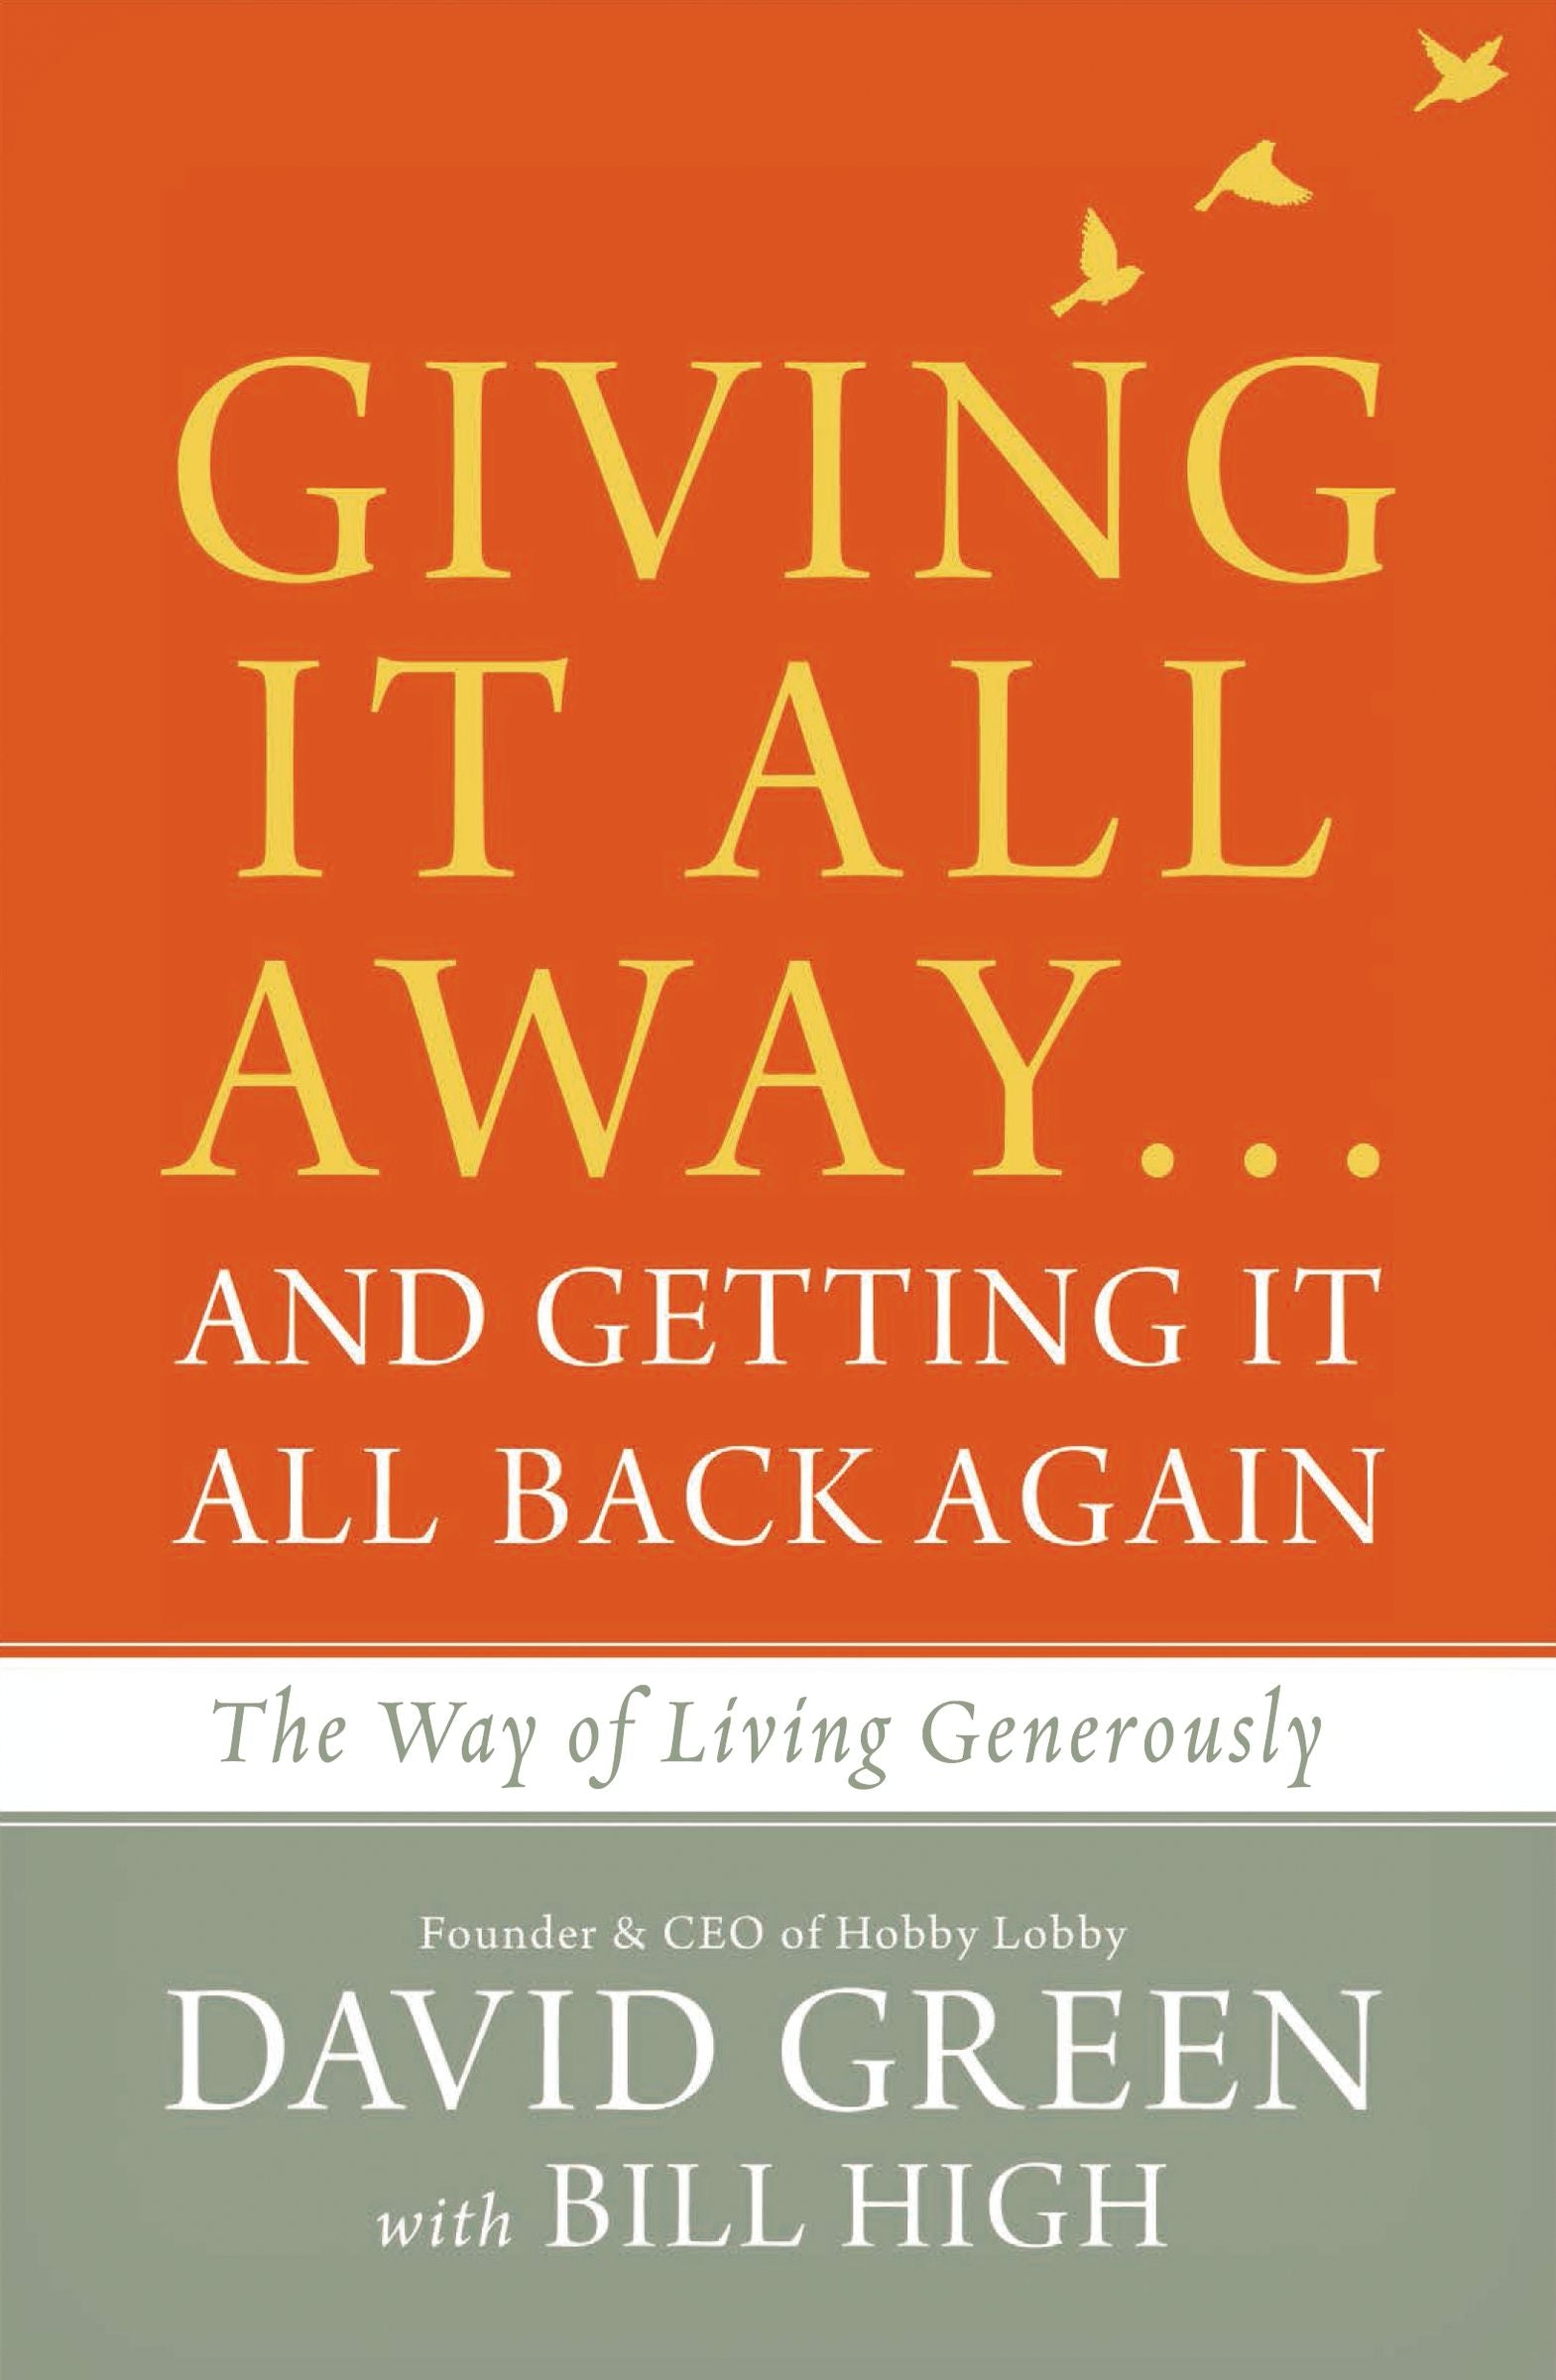 Image of Giving it All Away...and Getting it All Back Again other